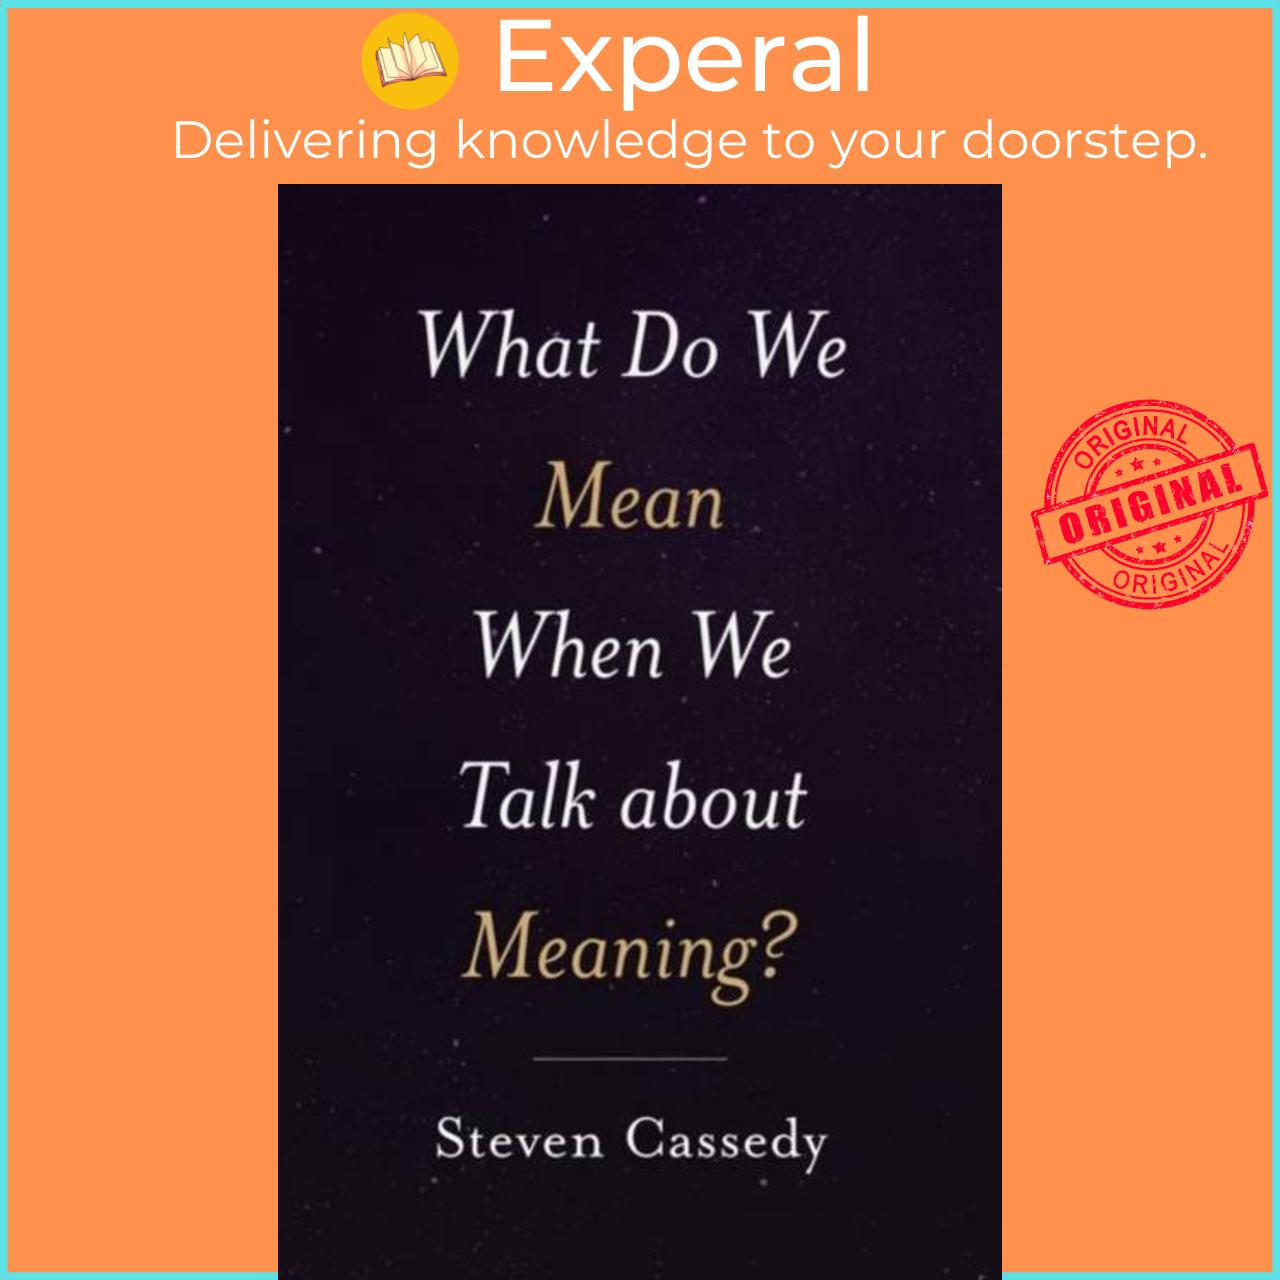 Sách - What Do We Mean When We Talk about Meaning? by Steven Cassedy (UK edition, hardcover)